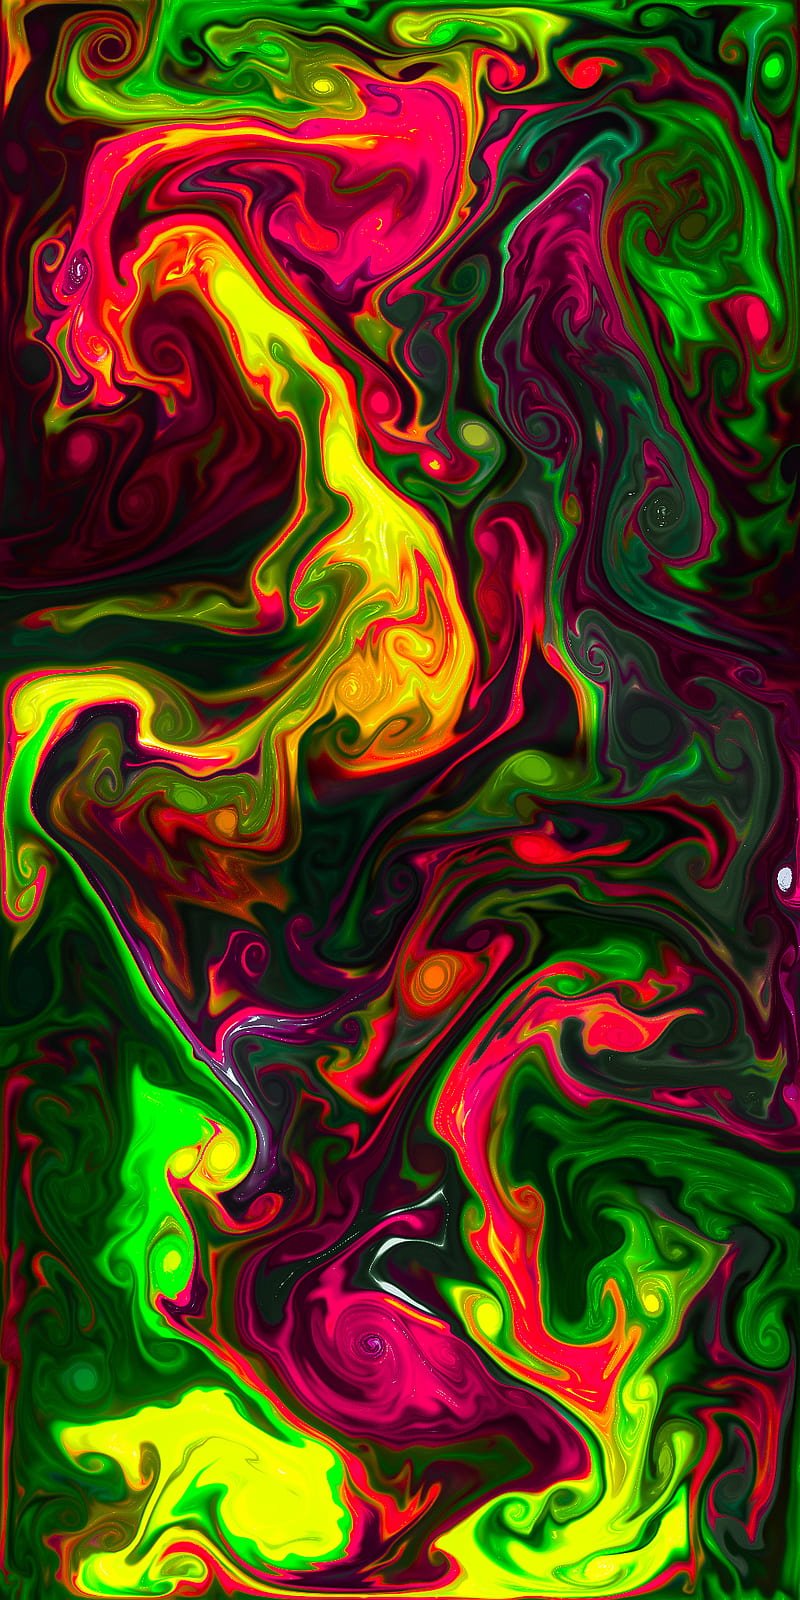 WWDC Wallpaper for iPhone OLED  Iphone oled Wallpaper iphone 4s Iphone  wallpaper 1080p